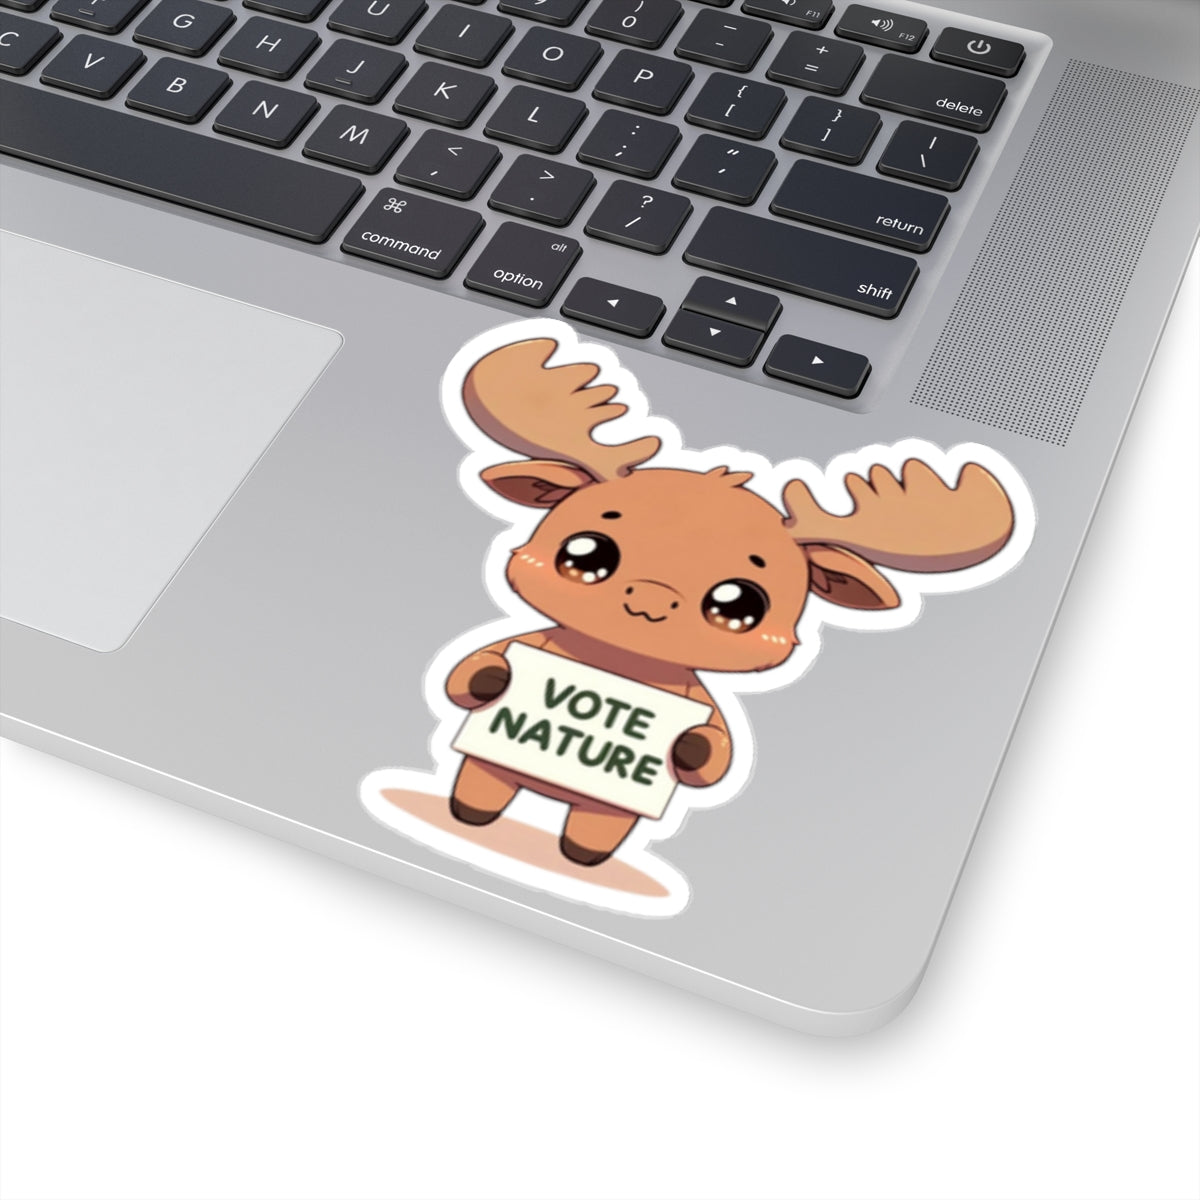 Inspirational Cute Moose Statement vinyl Sticker: Vote Nature! for laptop, kindle, phone, ipad, instrument case, notebook, or mood board